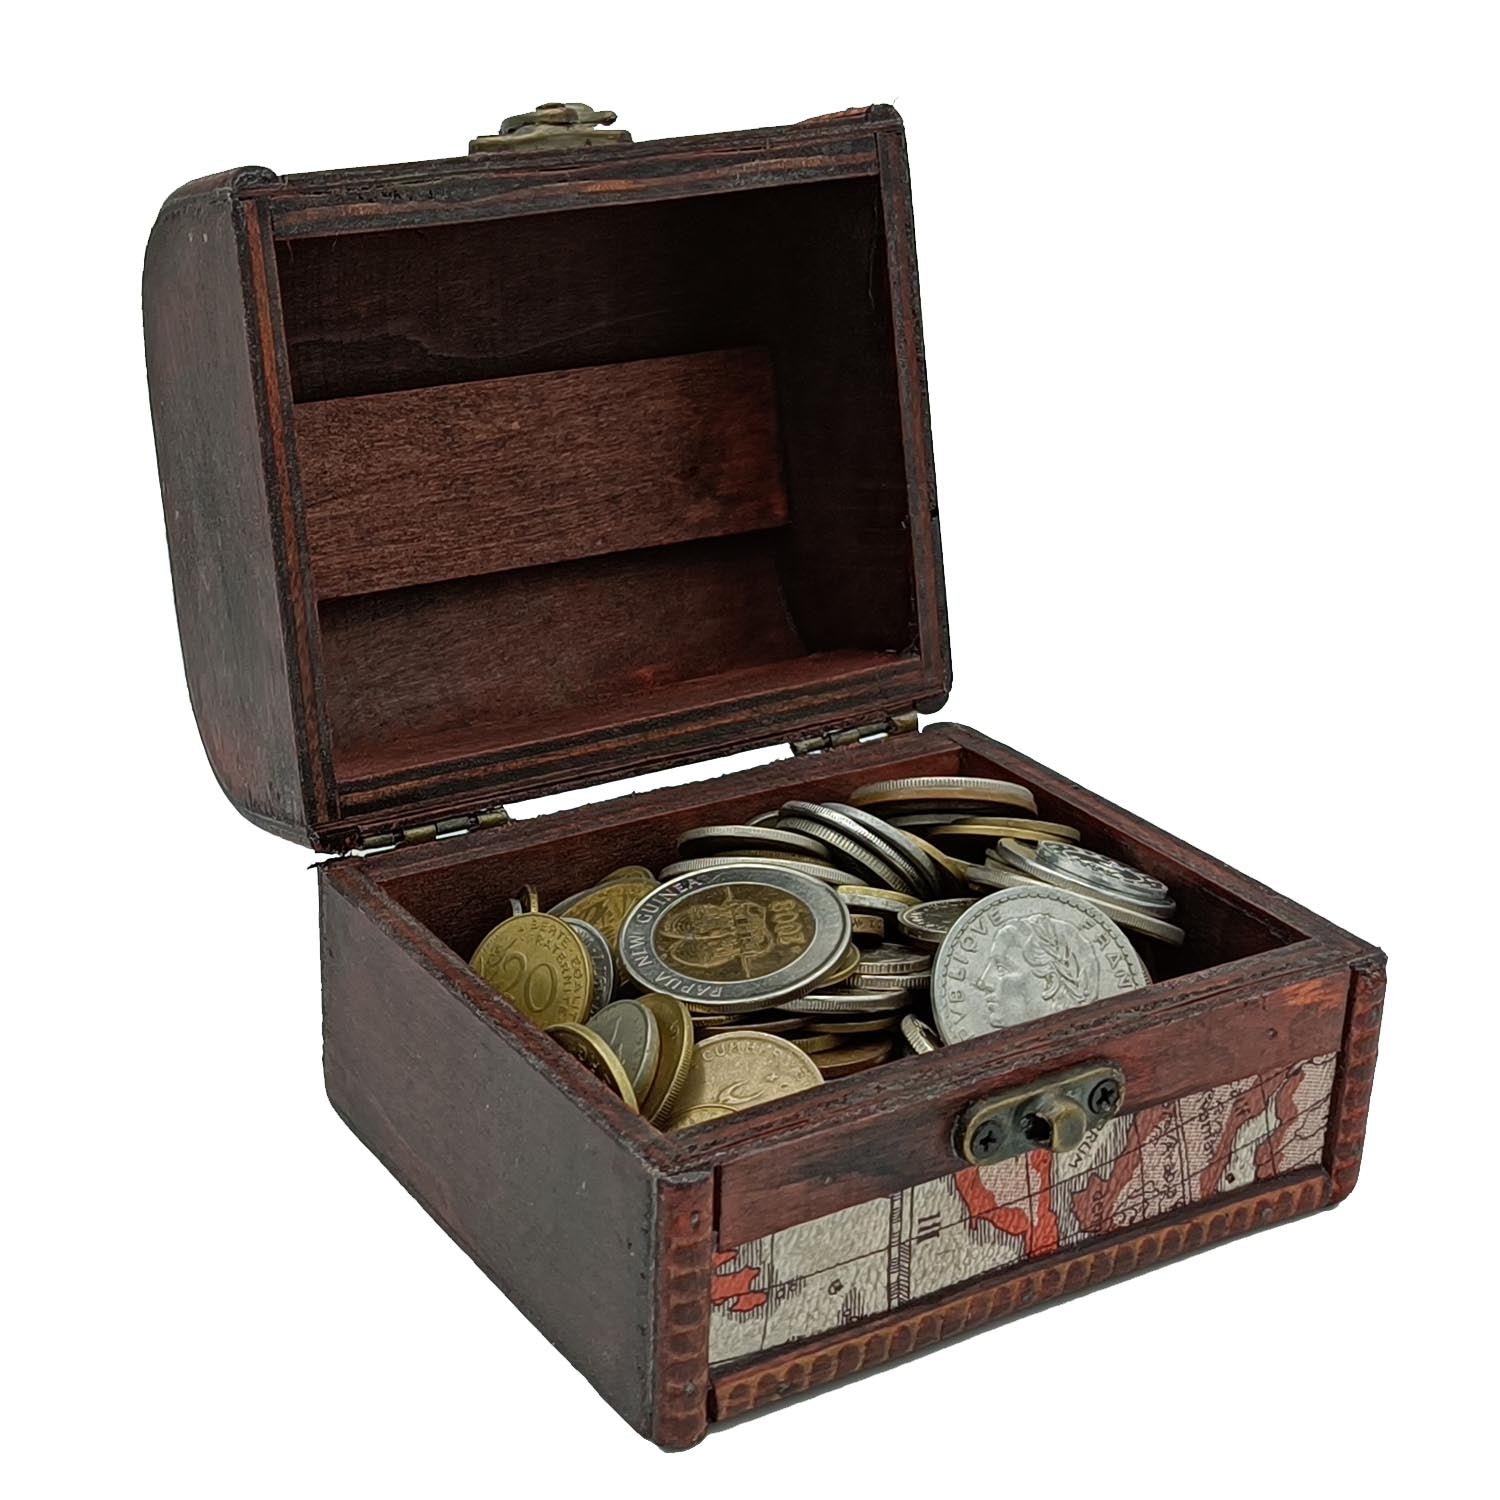 IMPACTO COLECCIONABLES Coin Collection Storagе - Collectible Coins for  Collectors - Treasure Chest with 1Lb. of Rare Coins - World Currency Set in